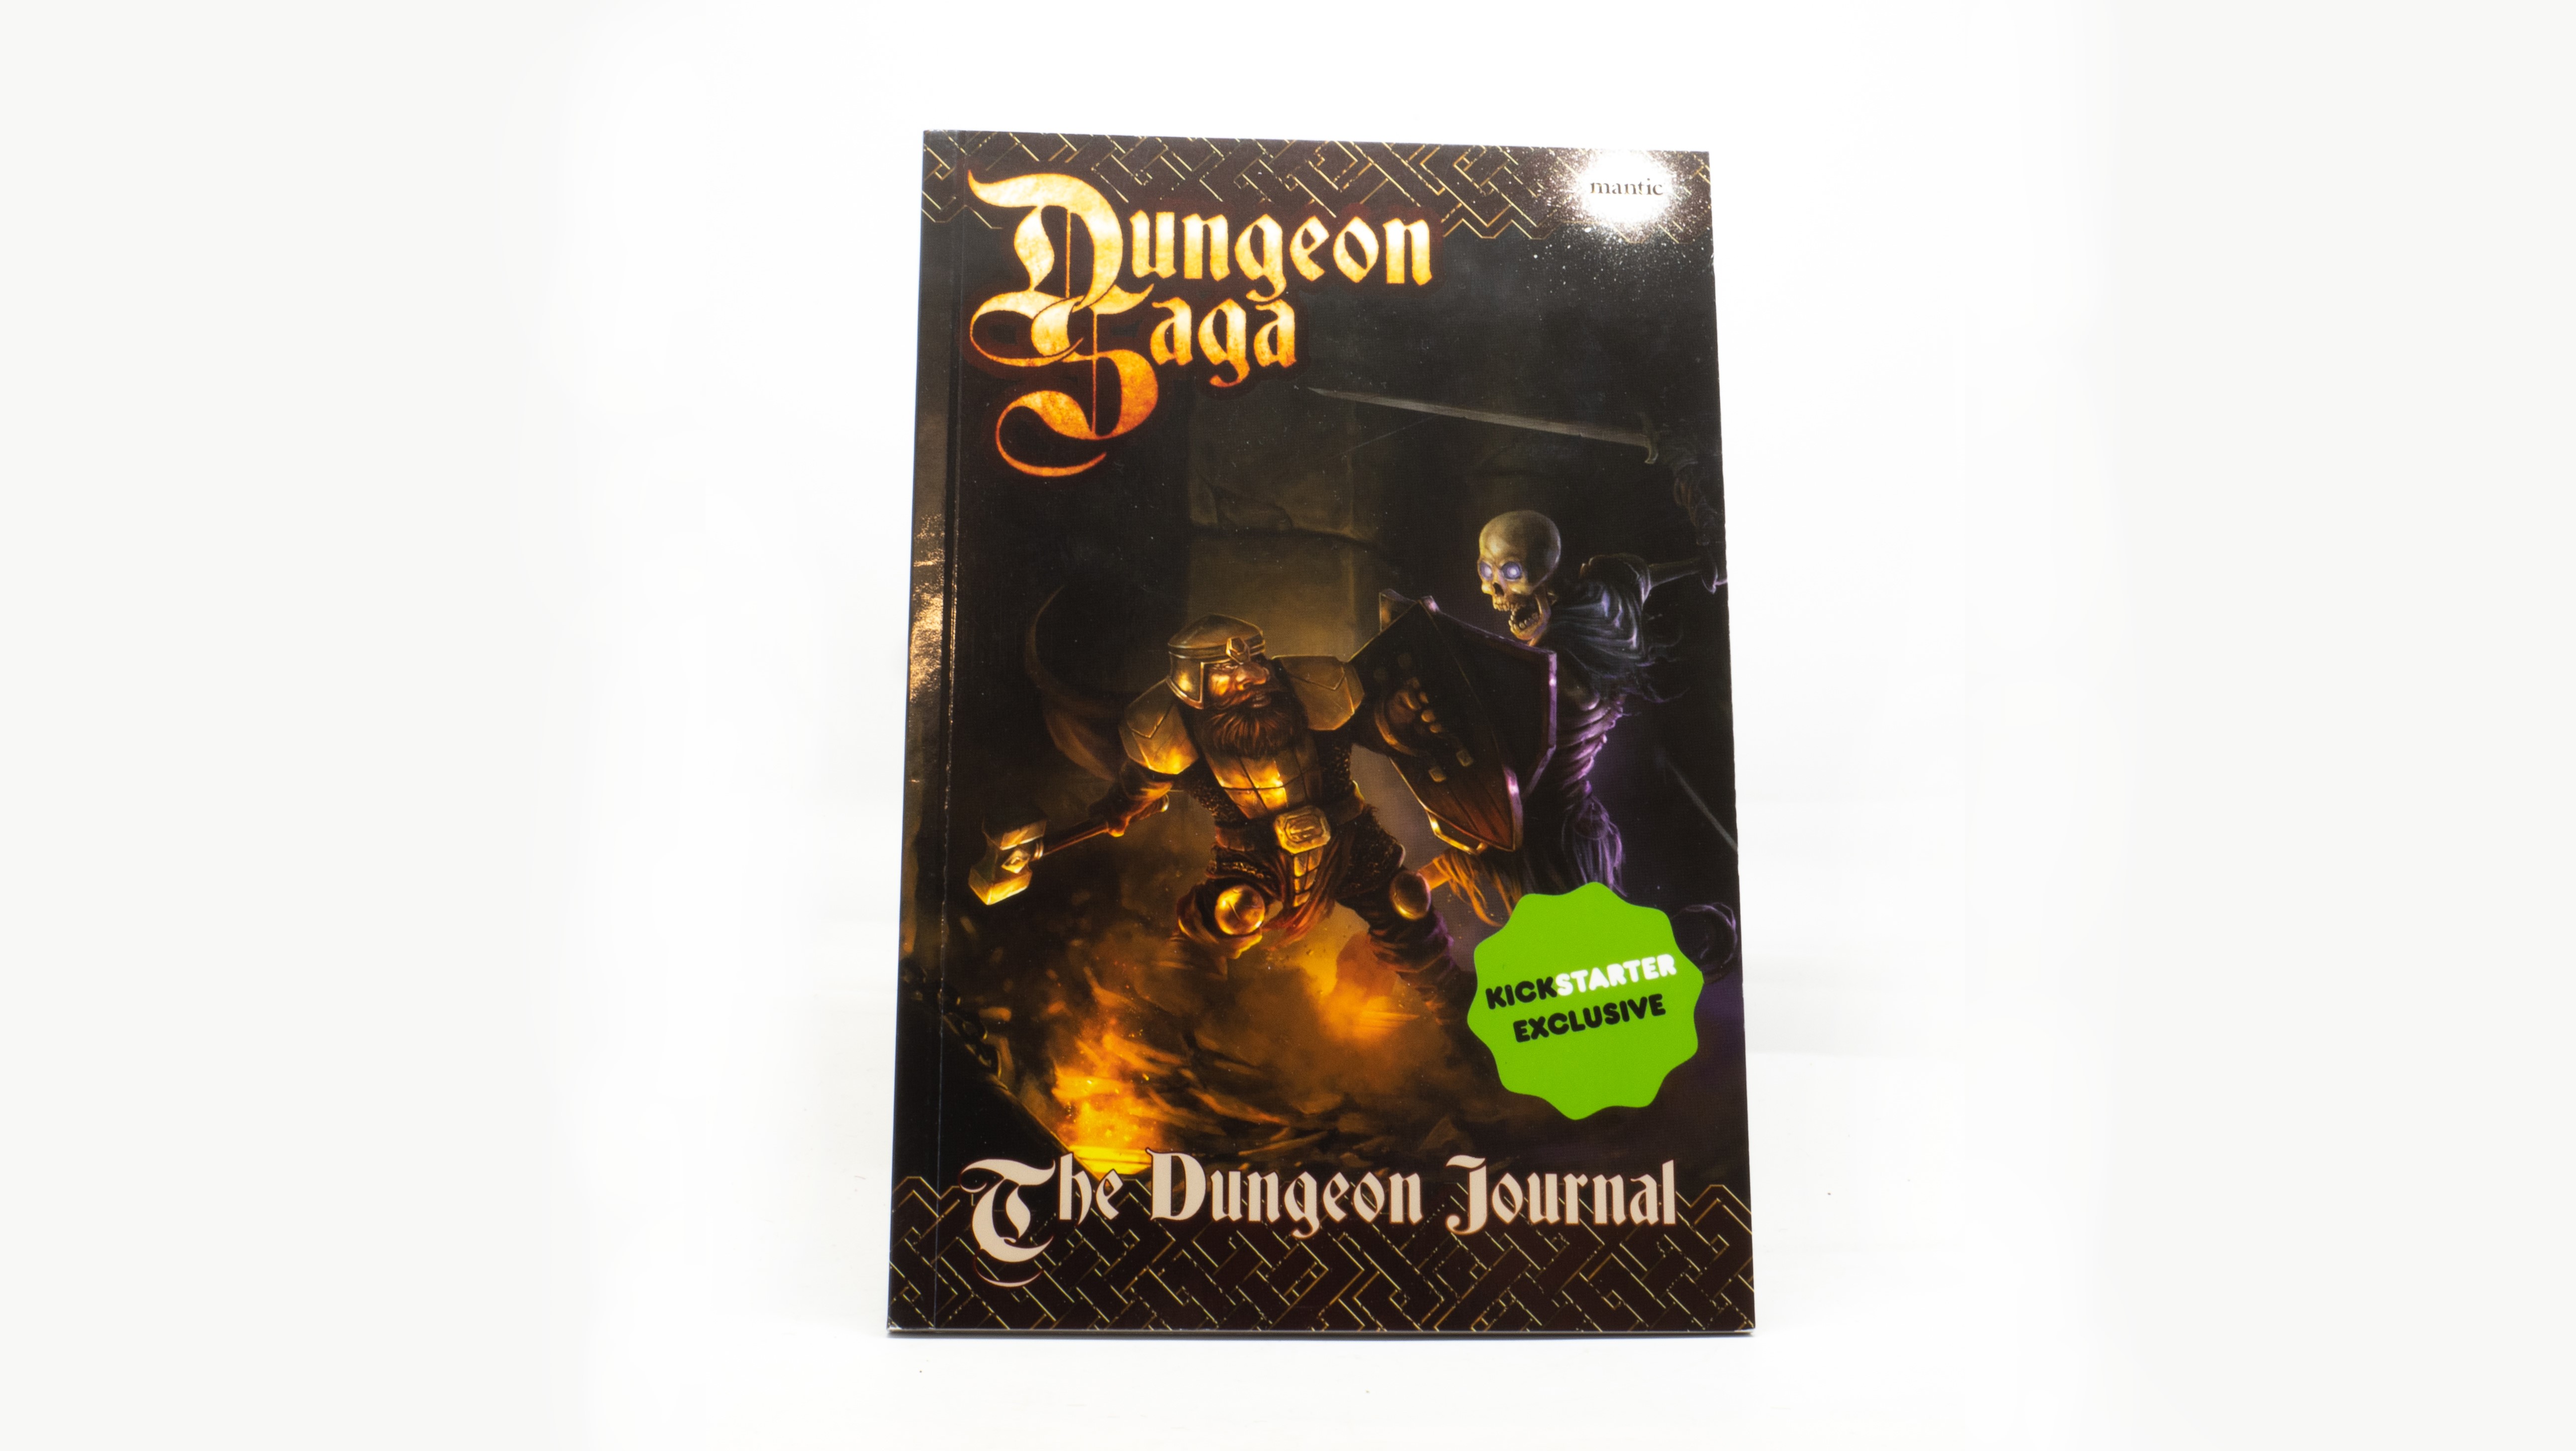 Dungeon Saga the dungeon journal 15 mantic points Gallery Image 1